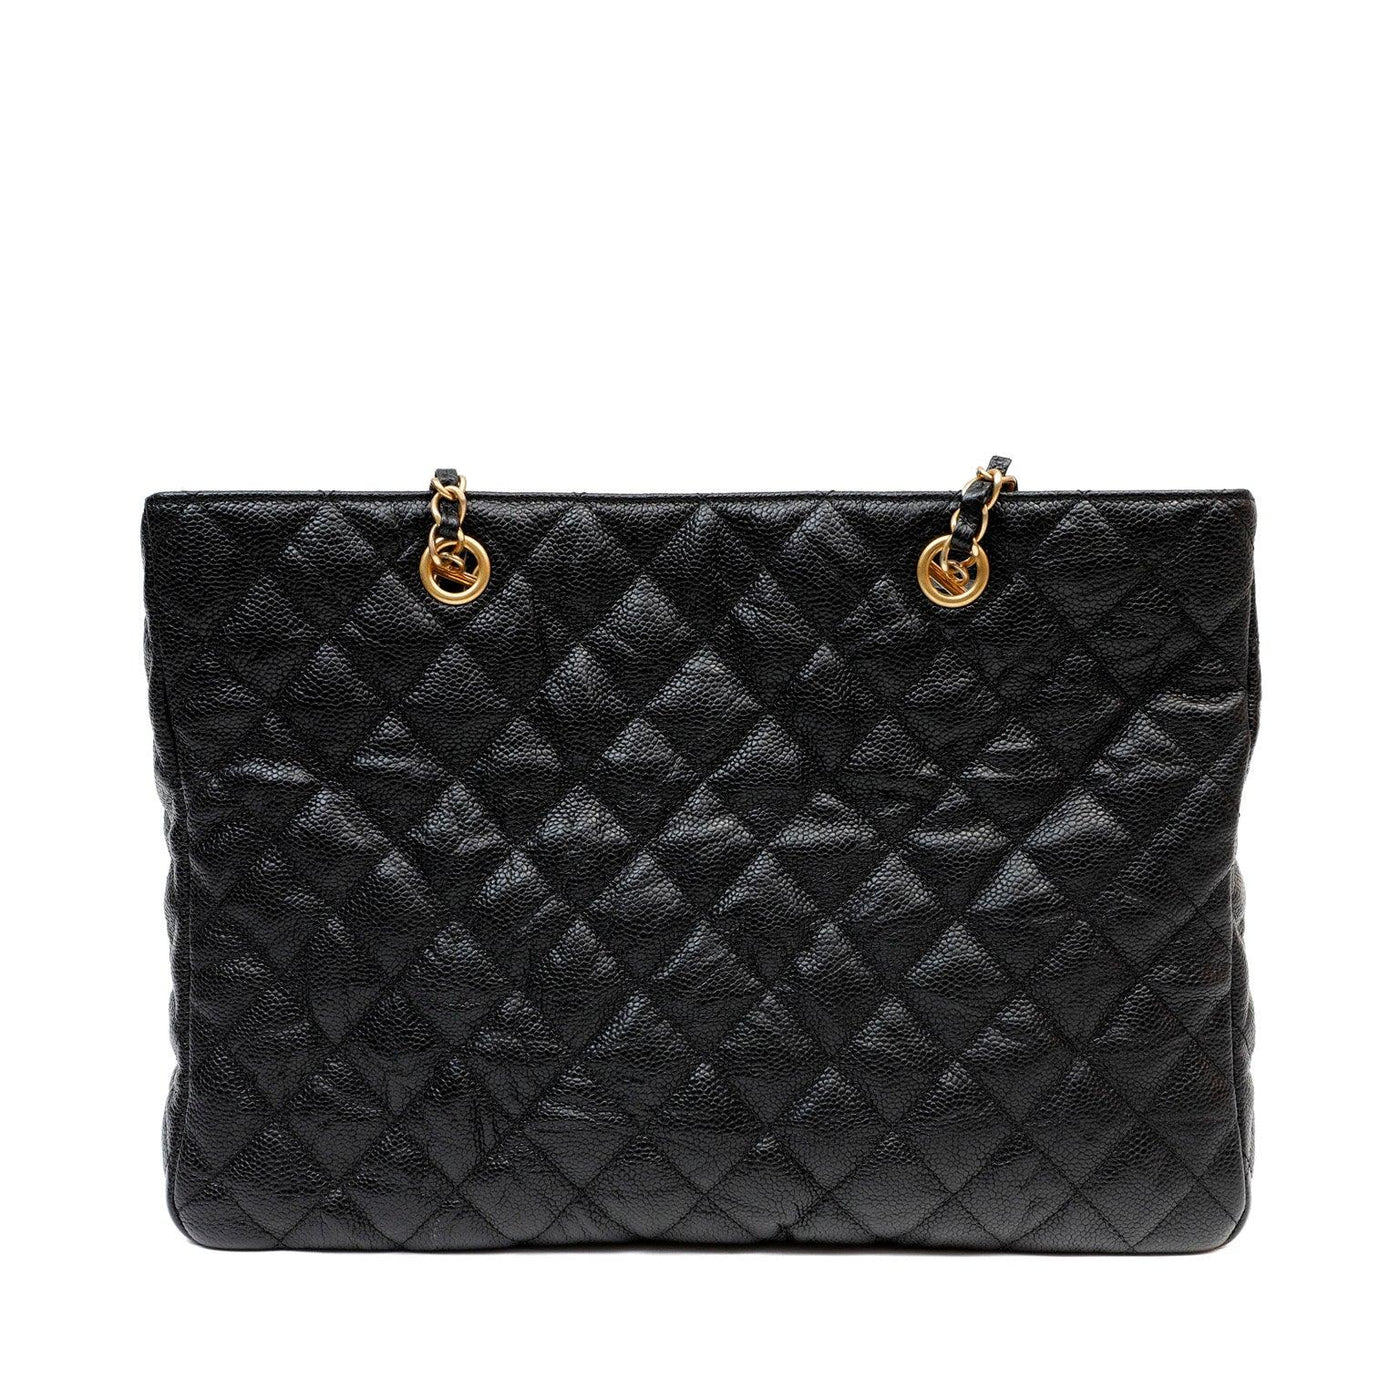 Chanel Black Caviar Leather Tote - Only Authentics